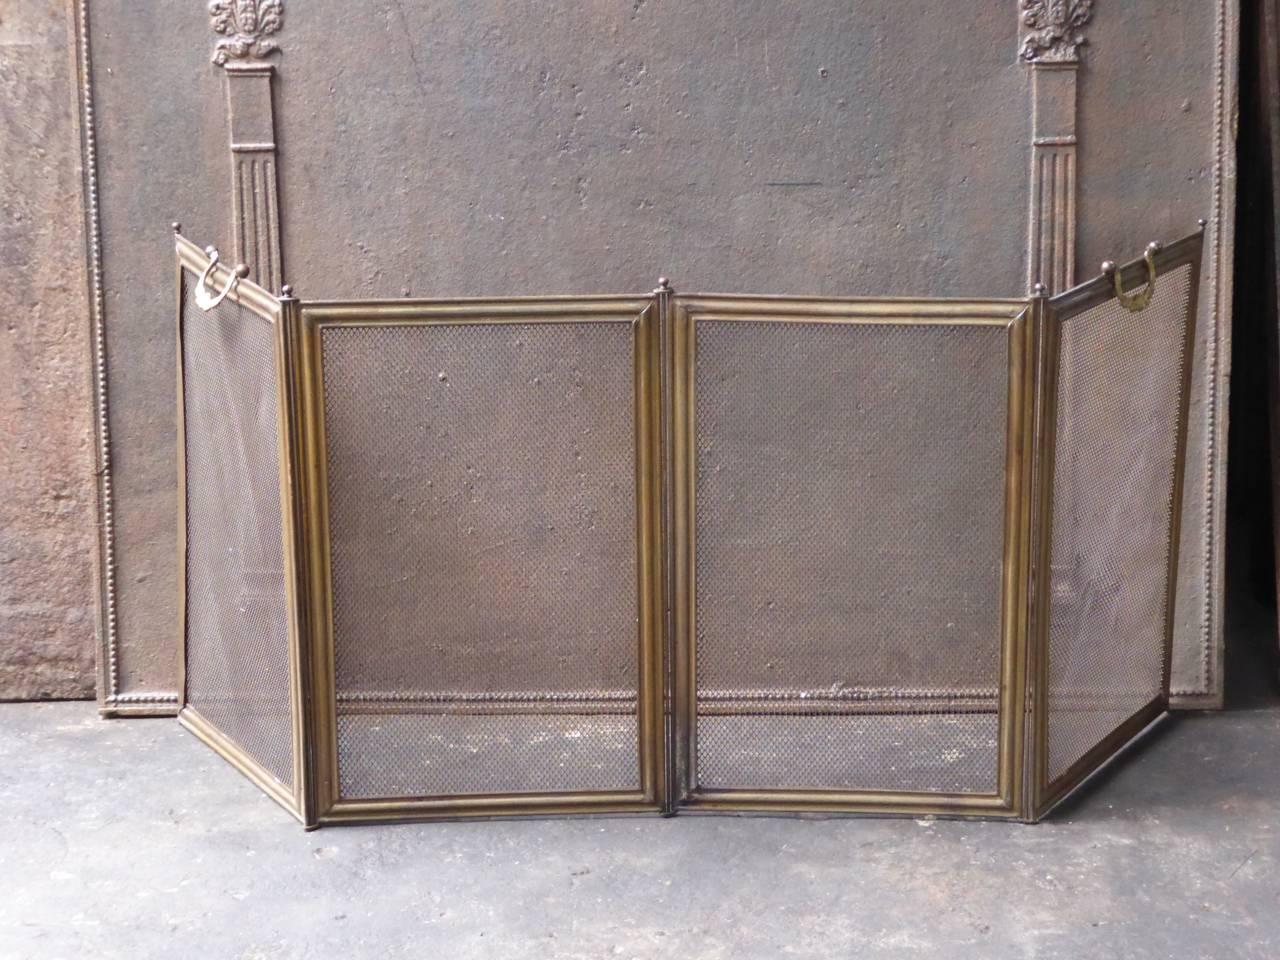 19th century French fireplace screen made of brass, iron and iron mesh.